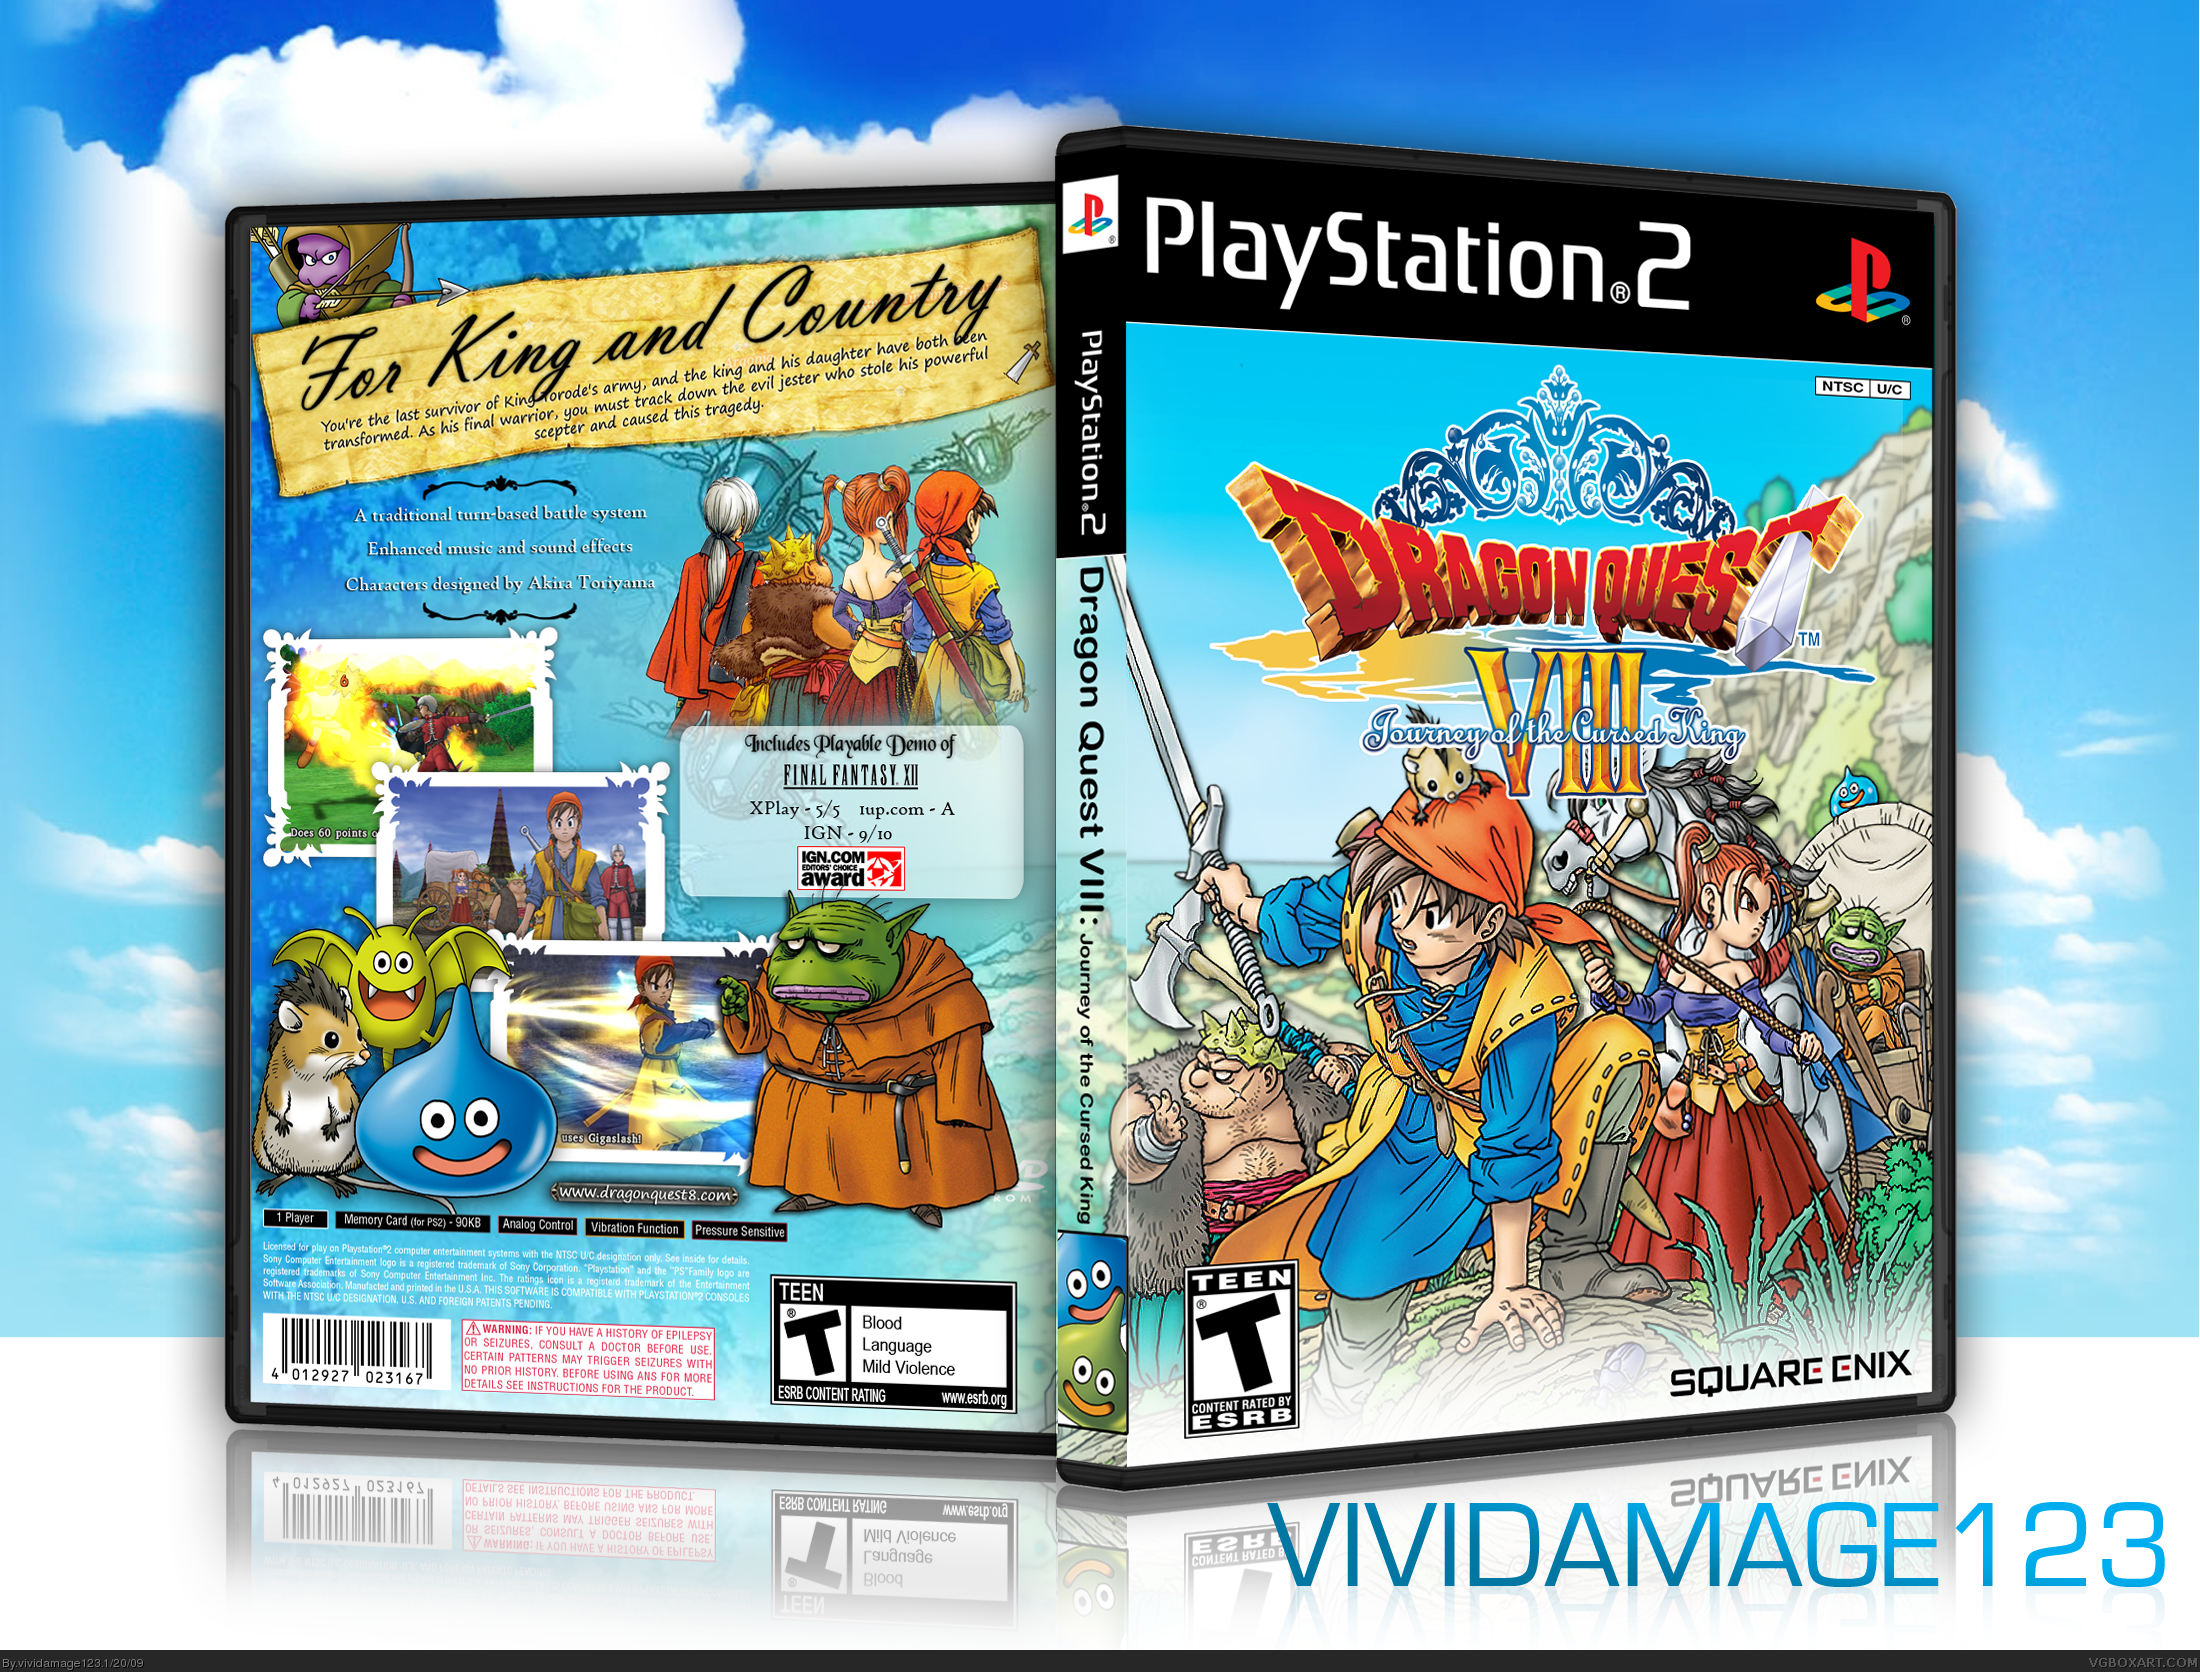 Dragon Quest VIII: Journey of the Cursed King for Nintendo